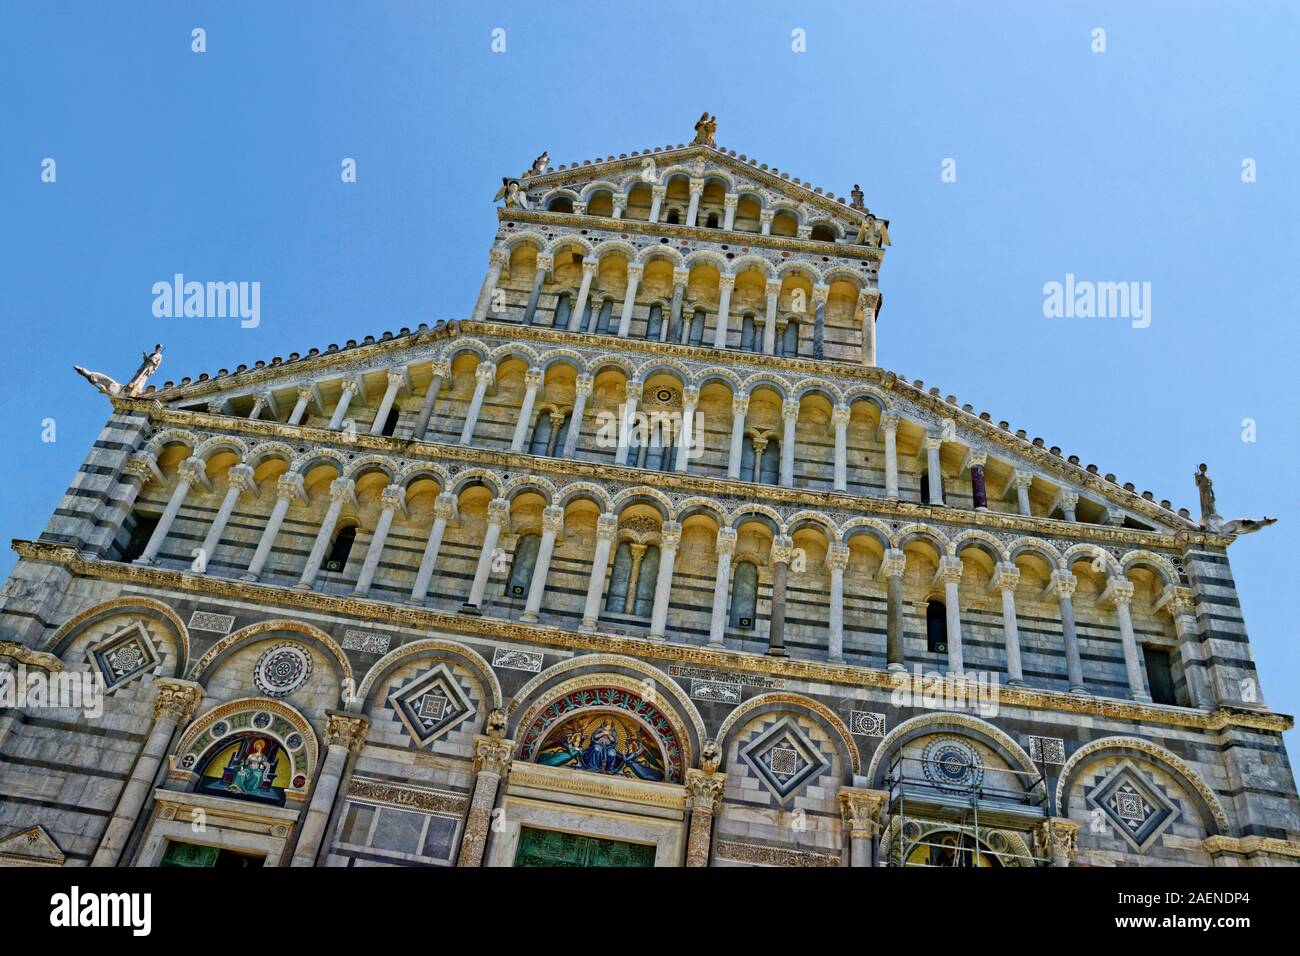 Facade of the cathedral dedicated to the Assumption of the Virgin Mary at Pisa, Tuscany, Italy. Stock Photo